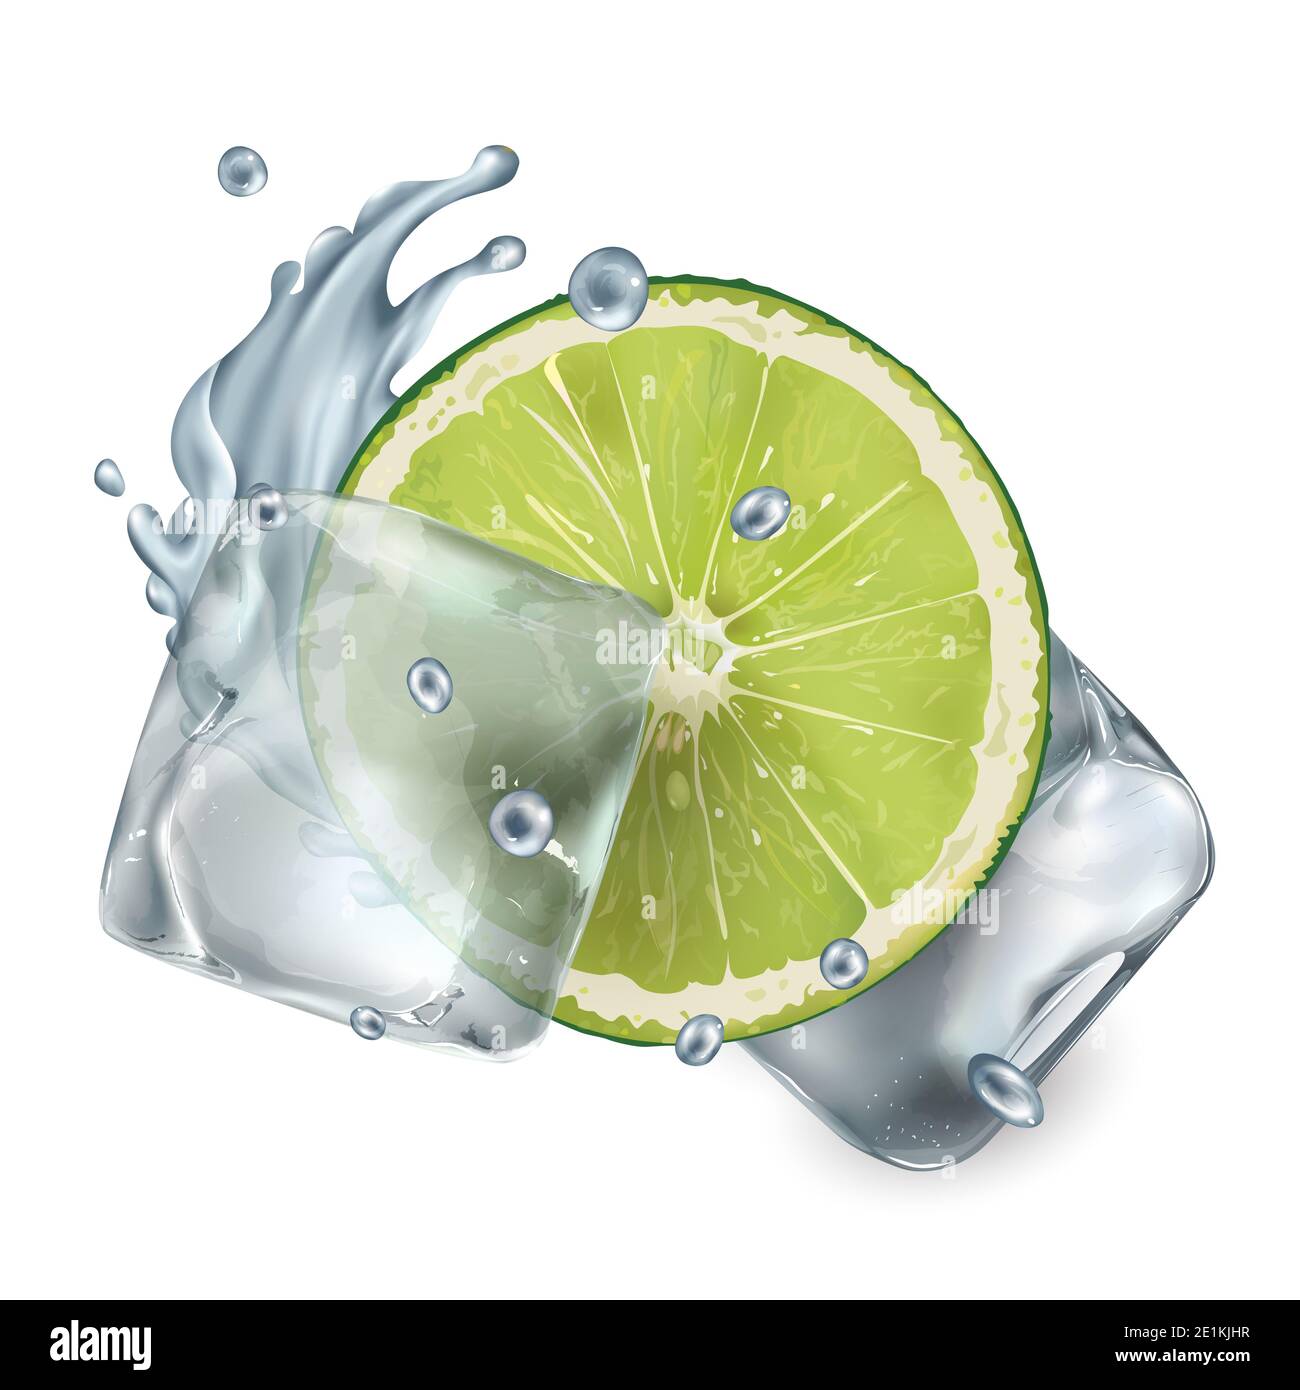 Half a lime with ice cubes and water splash Stock Photo